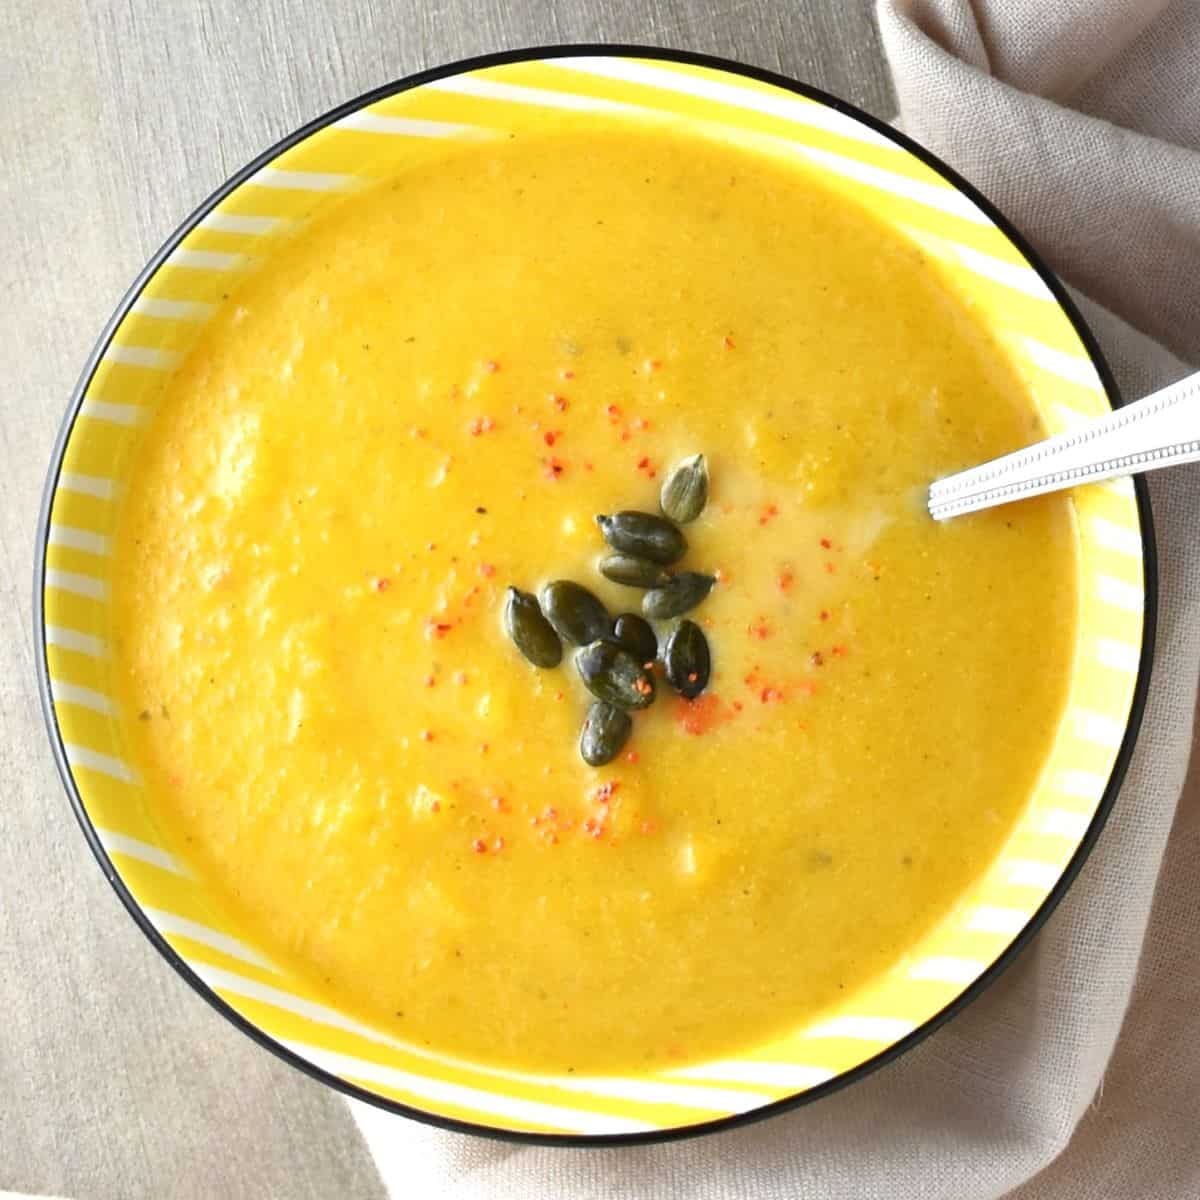 Top down view of creamy Polish pumpkin soup in yellow bowl with spoon.